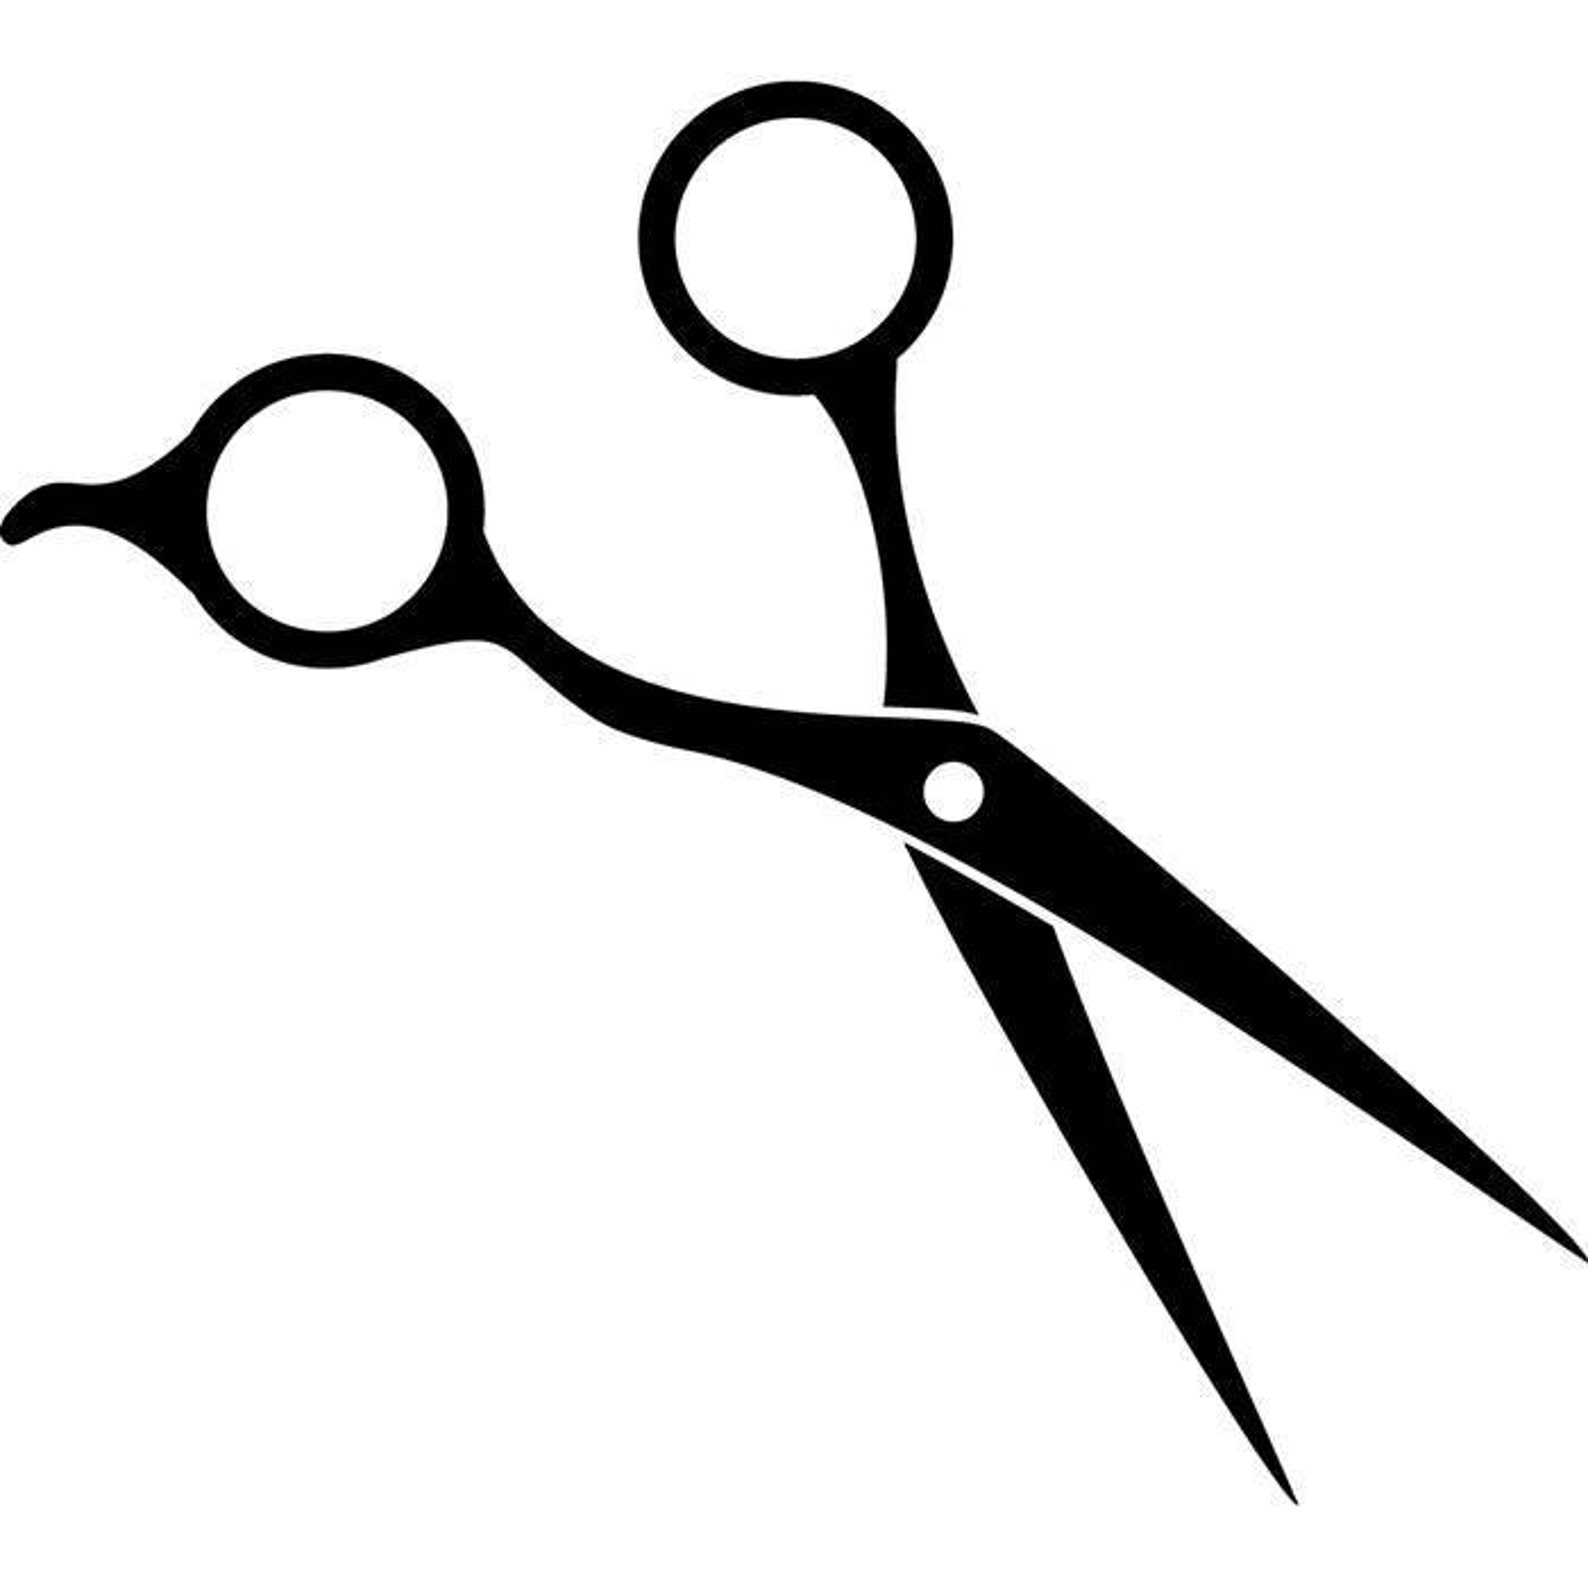 Scissors Hair Accessories Barber Stylish Barbershop Fashion .SVG .EPS .PNG ...